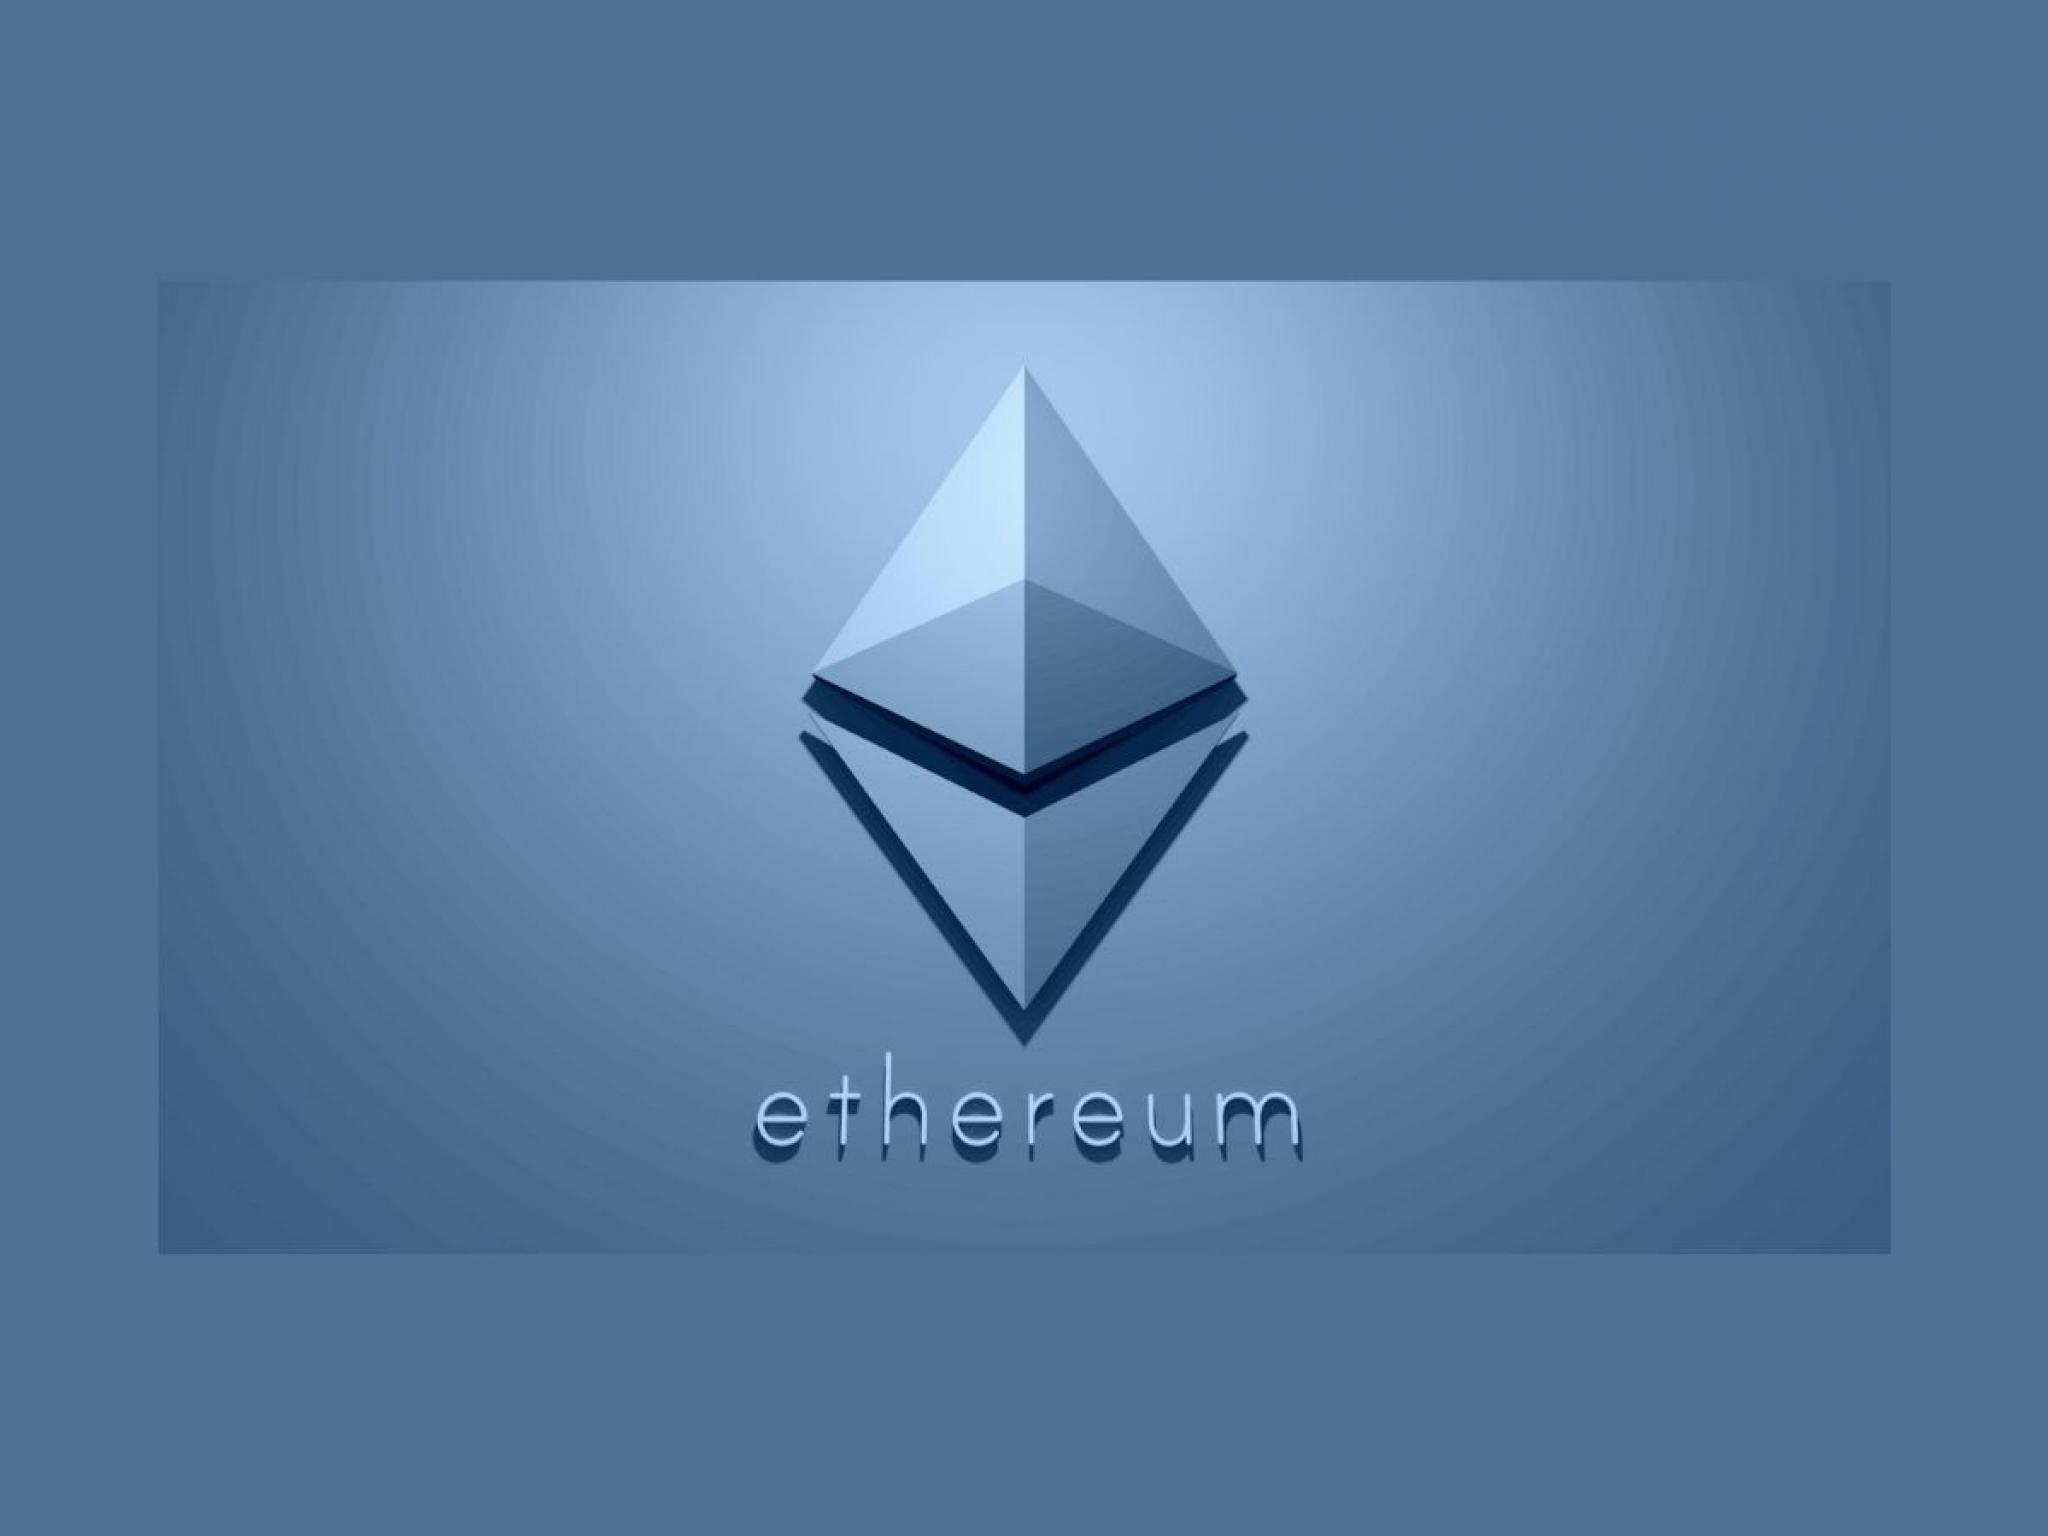  ethereum-edges-lower-following-jobless-claims-data-synthetix-compound-among-top-losers 